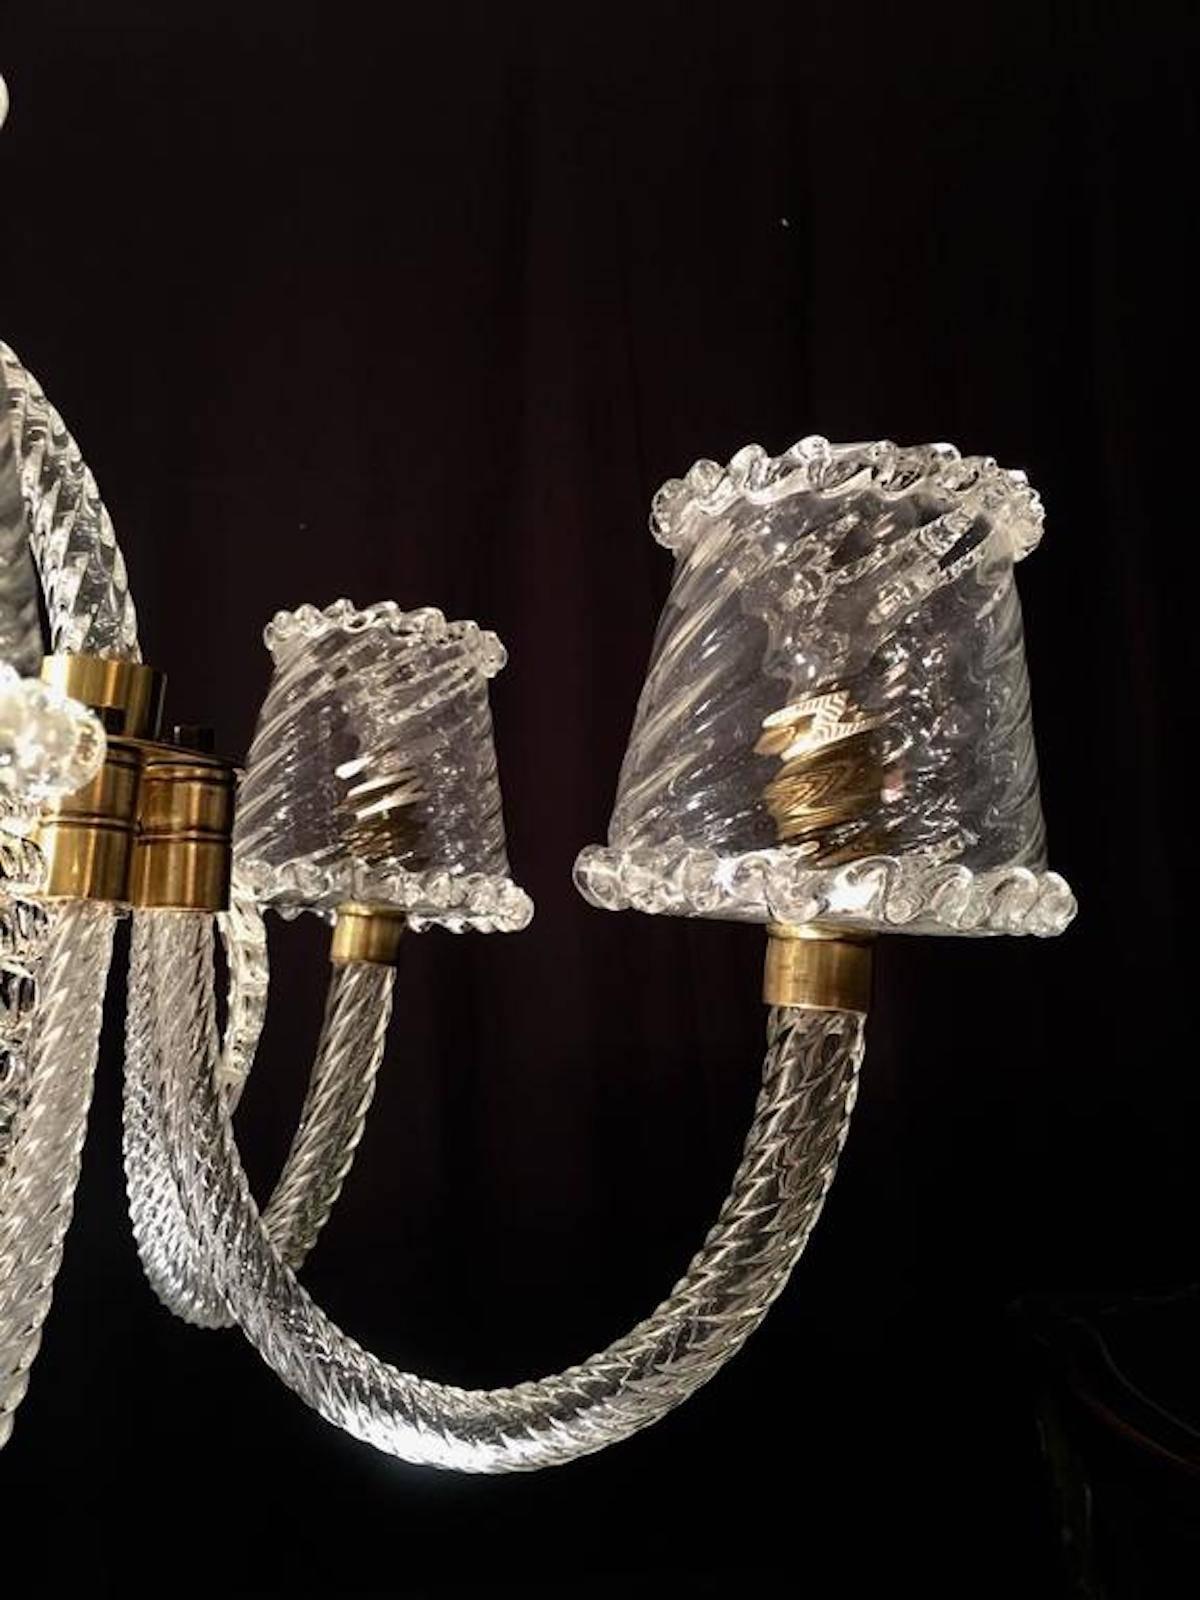 Majestic Liberty Chandelier by Ercole Barovier, Murano, 1940s For Sale 1